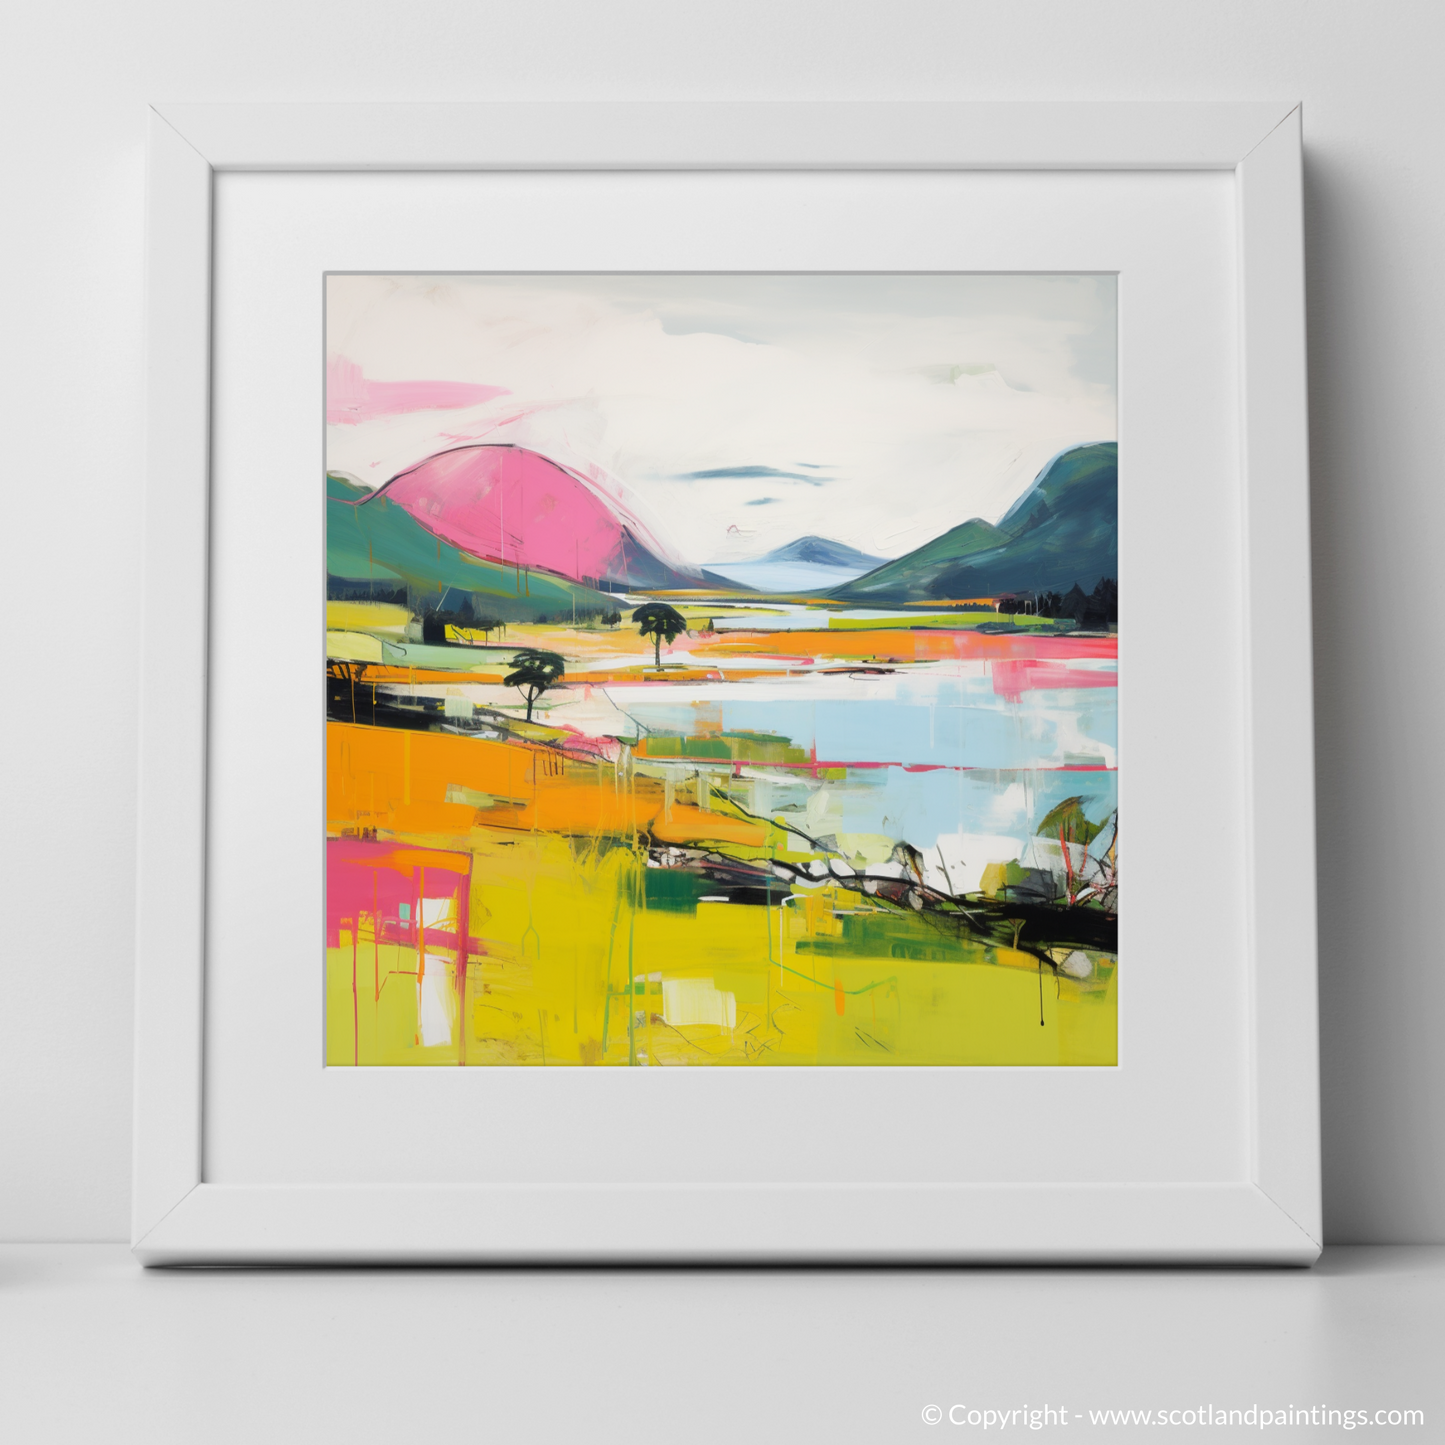 Art Print of Loch Linnhe, Highlands in summer with a white frame